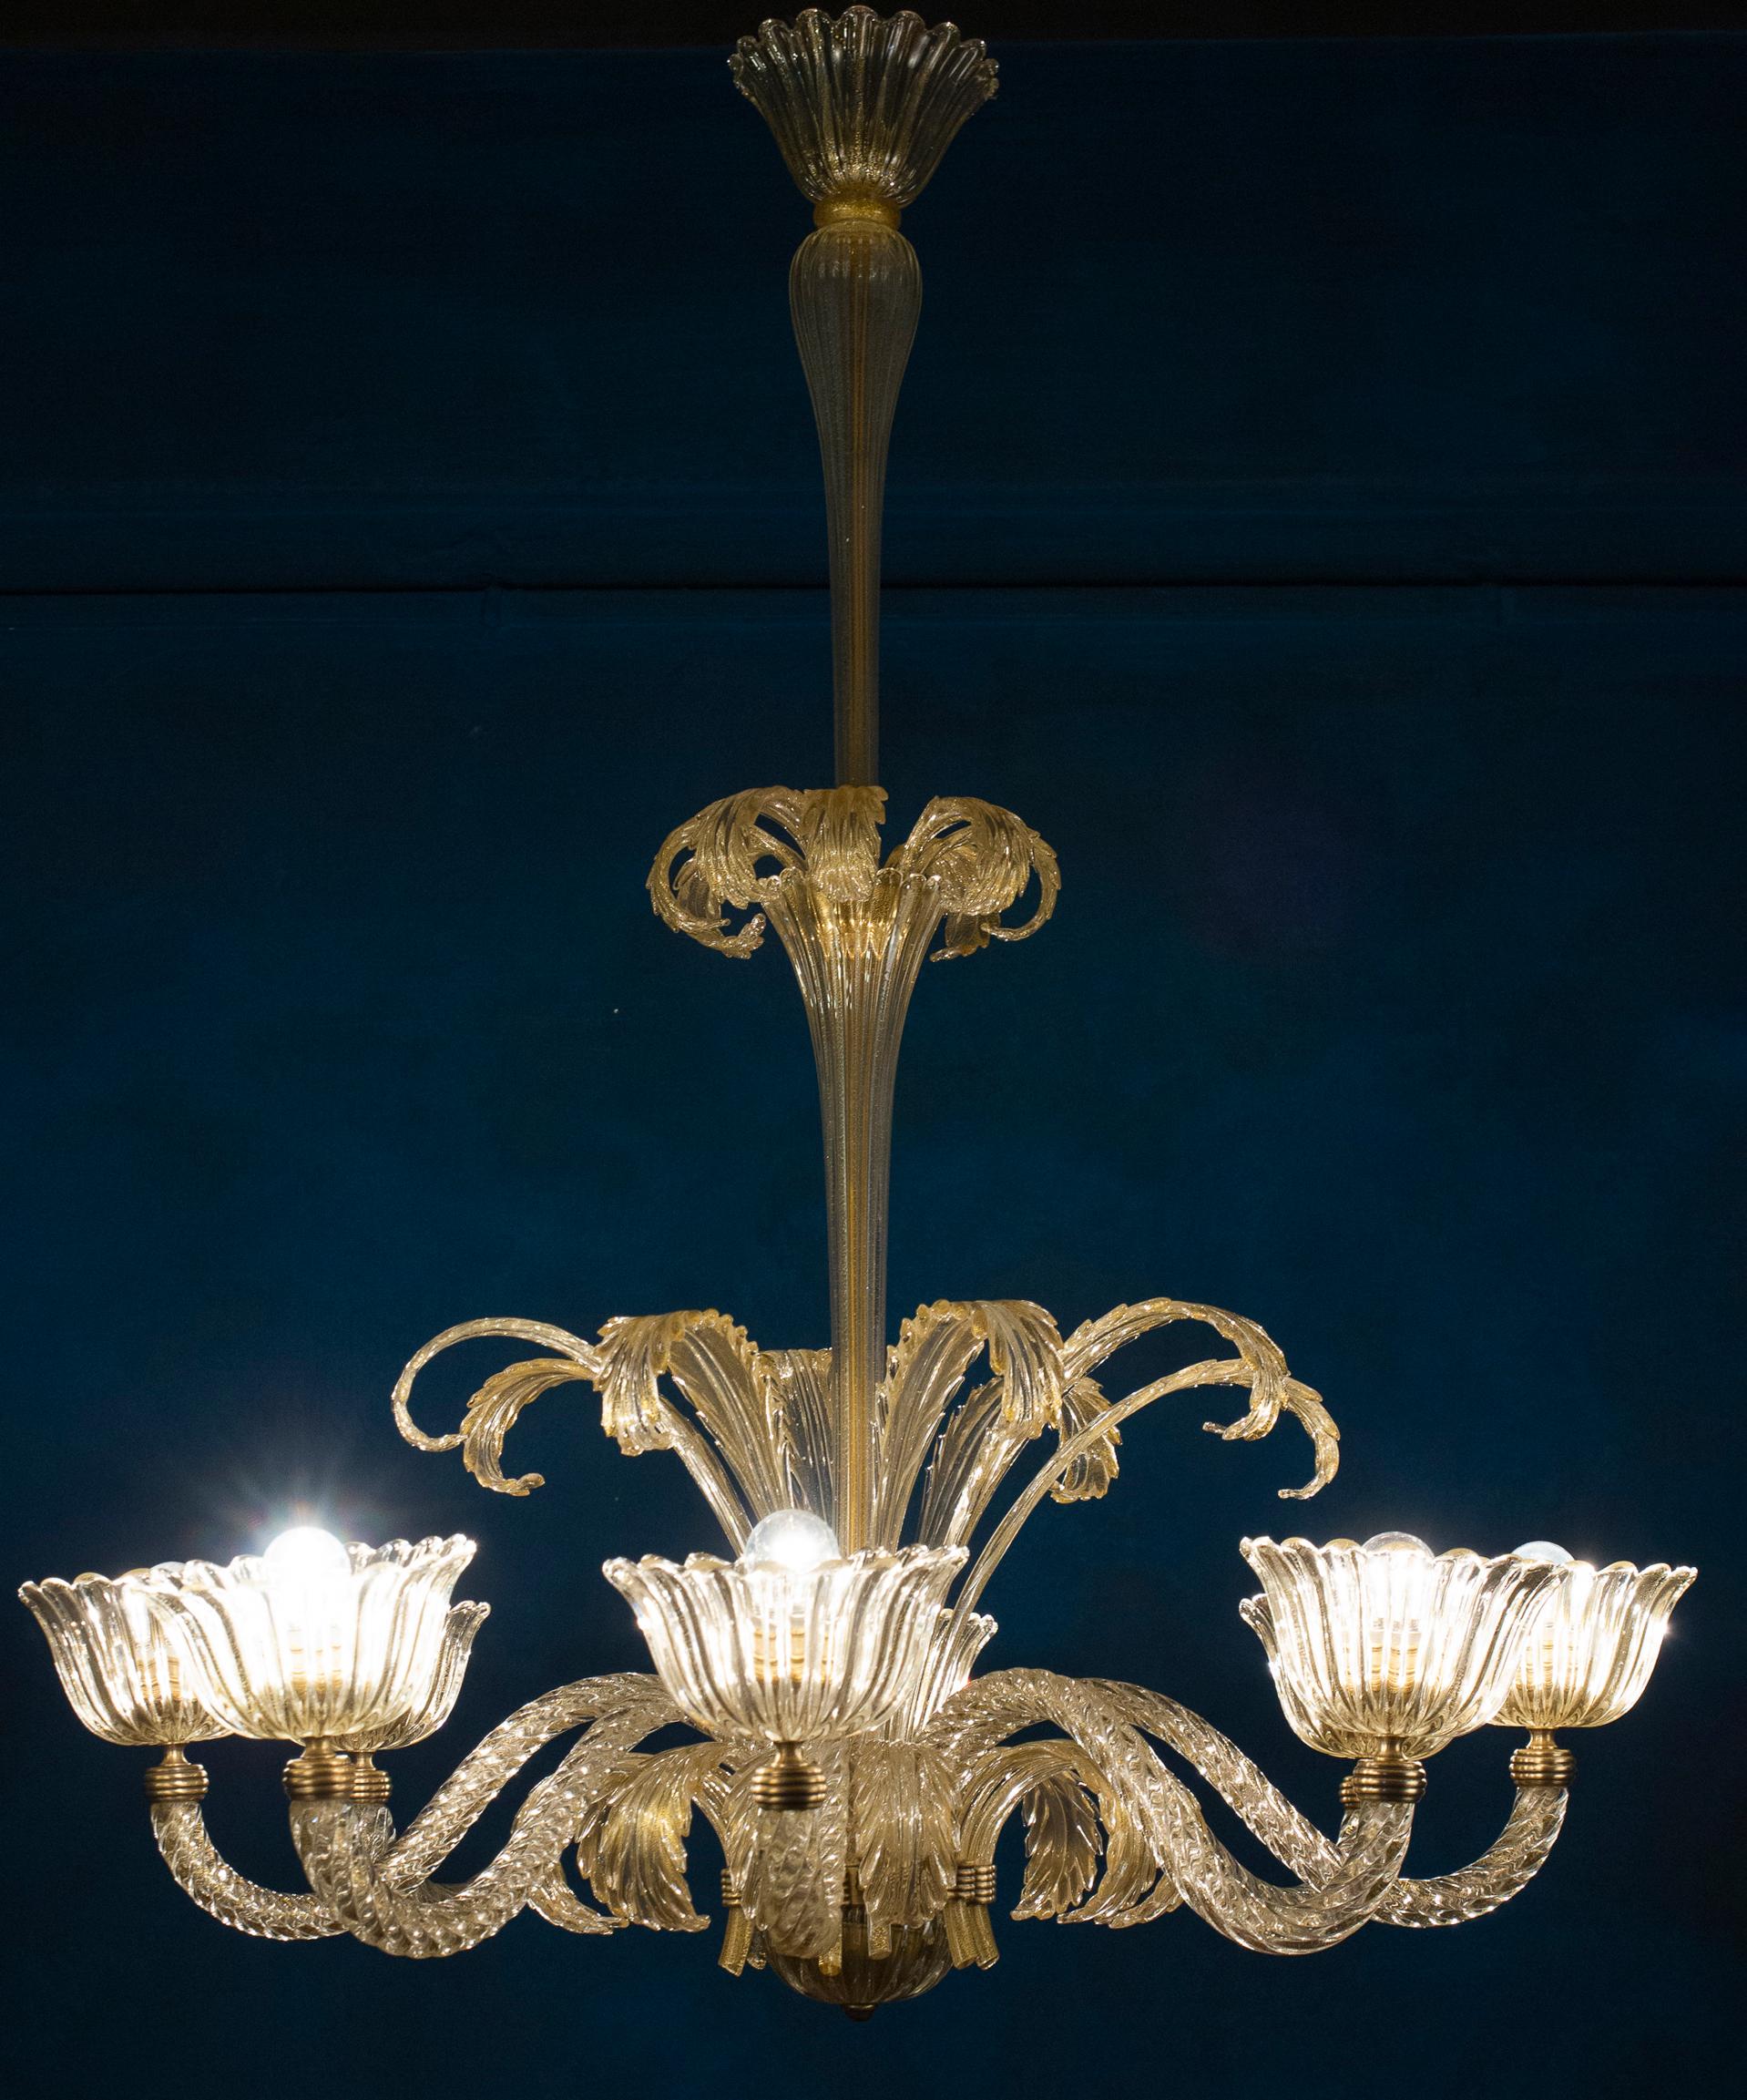 Magnificent Art Deco Mounted Murano Glass Chandelier by Ercole Barovier, 1940 For Sale 3